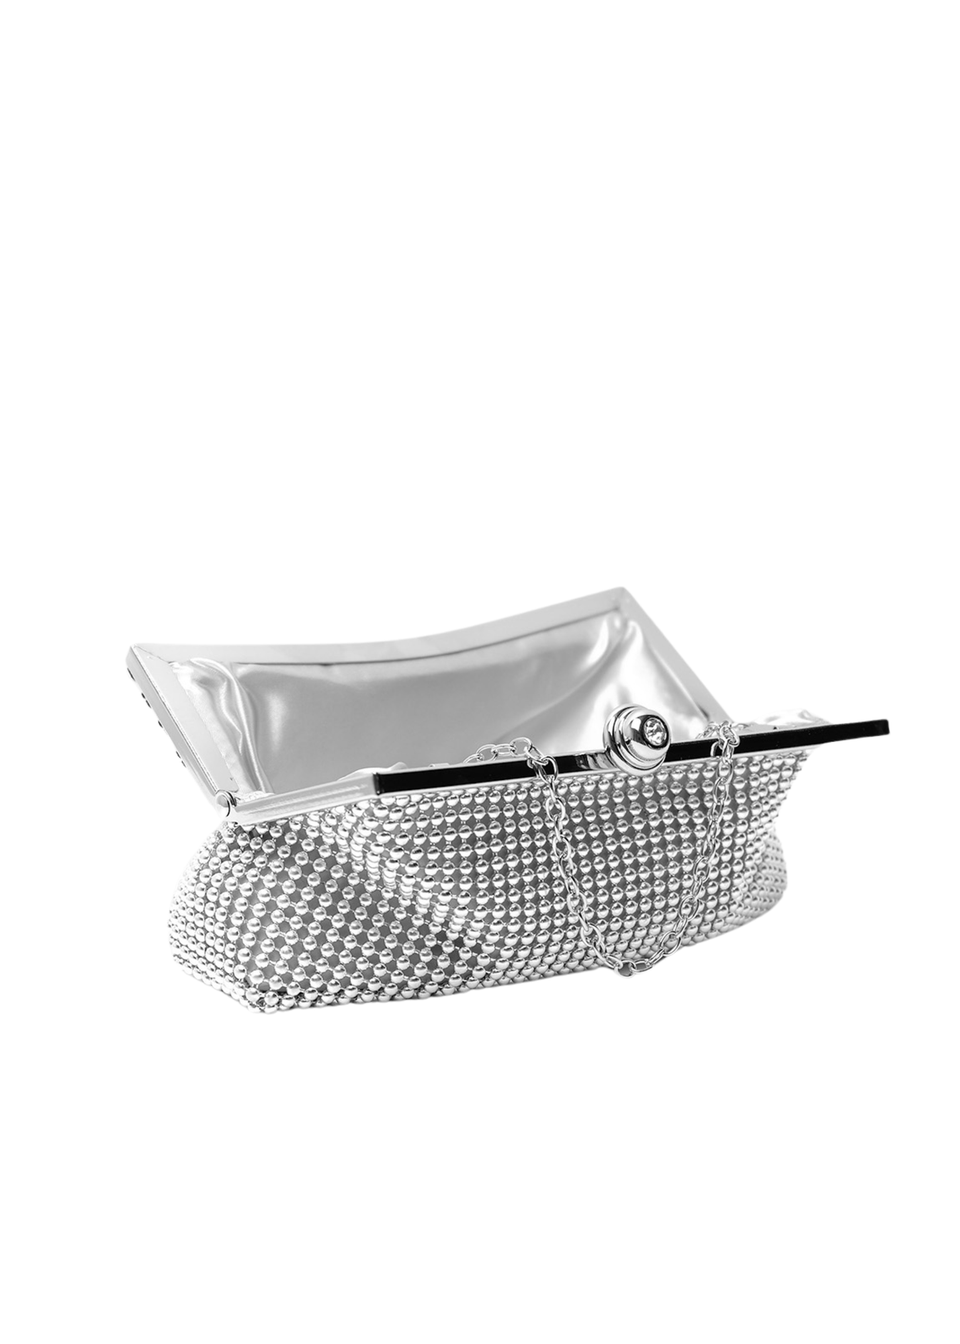 Where's That From Silver Caroline Crystal Embellished Evening Clutch Bag